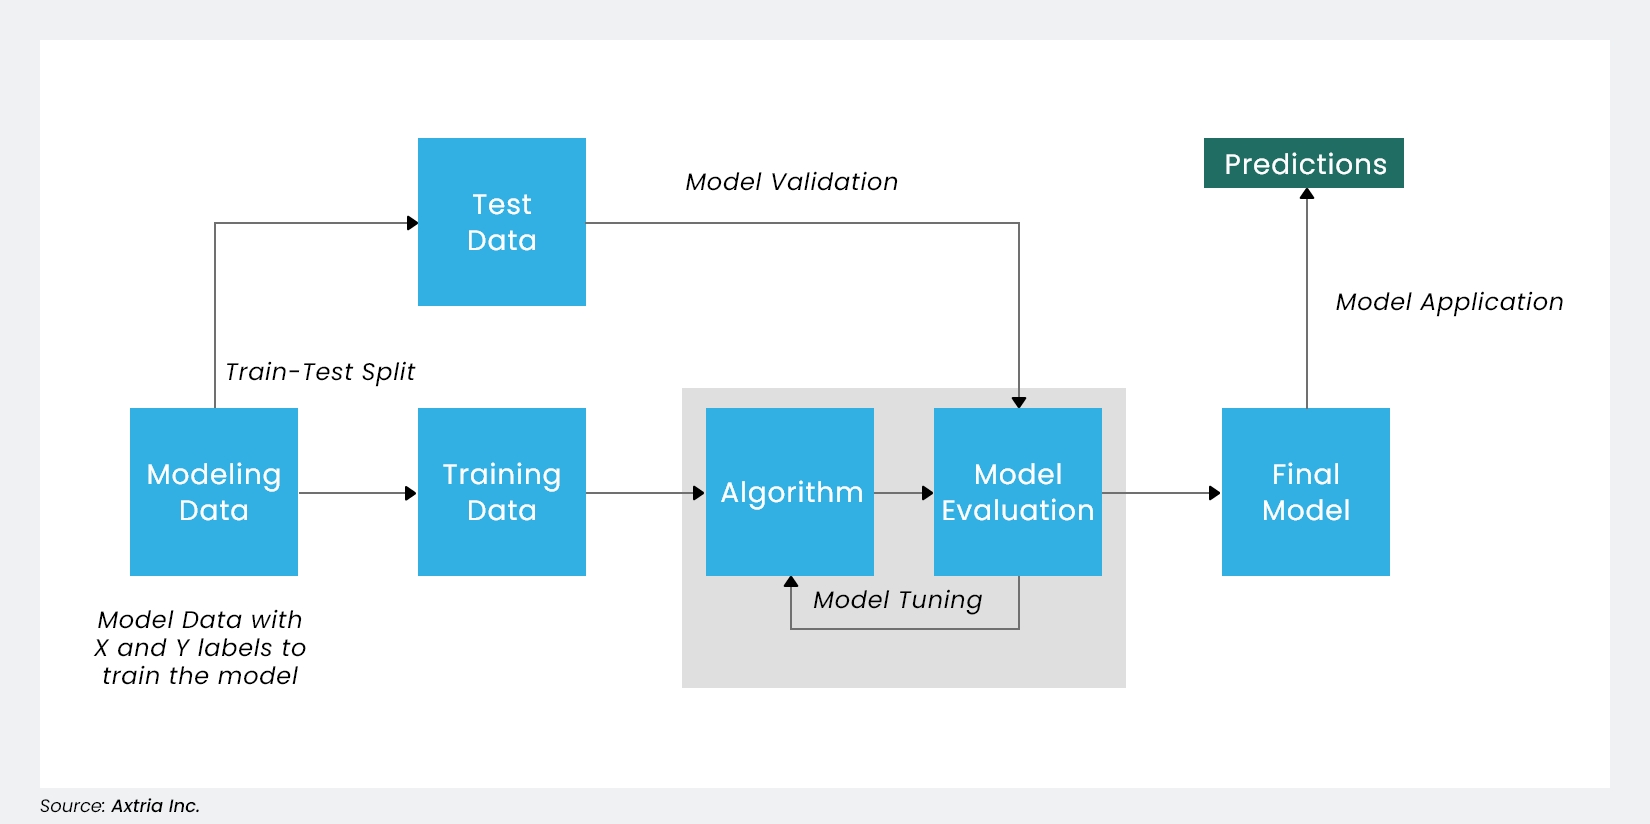 Overview of the Machine Learning Model